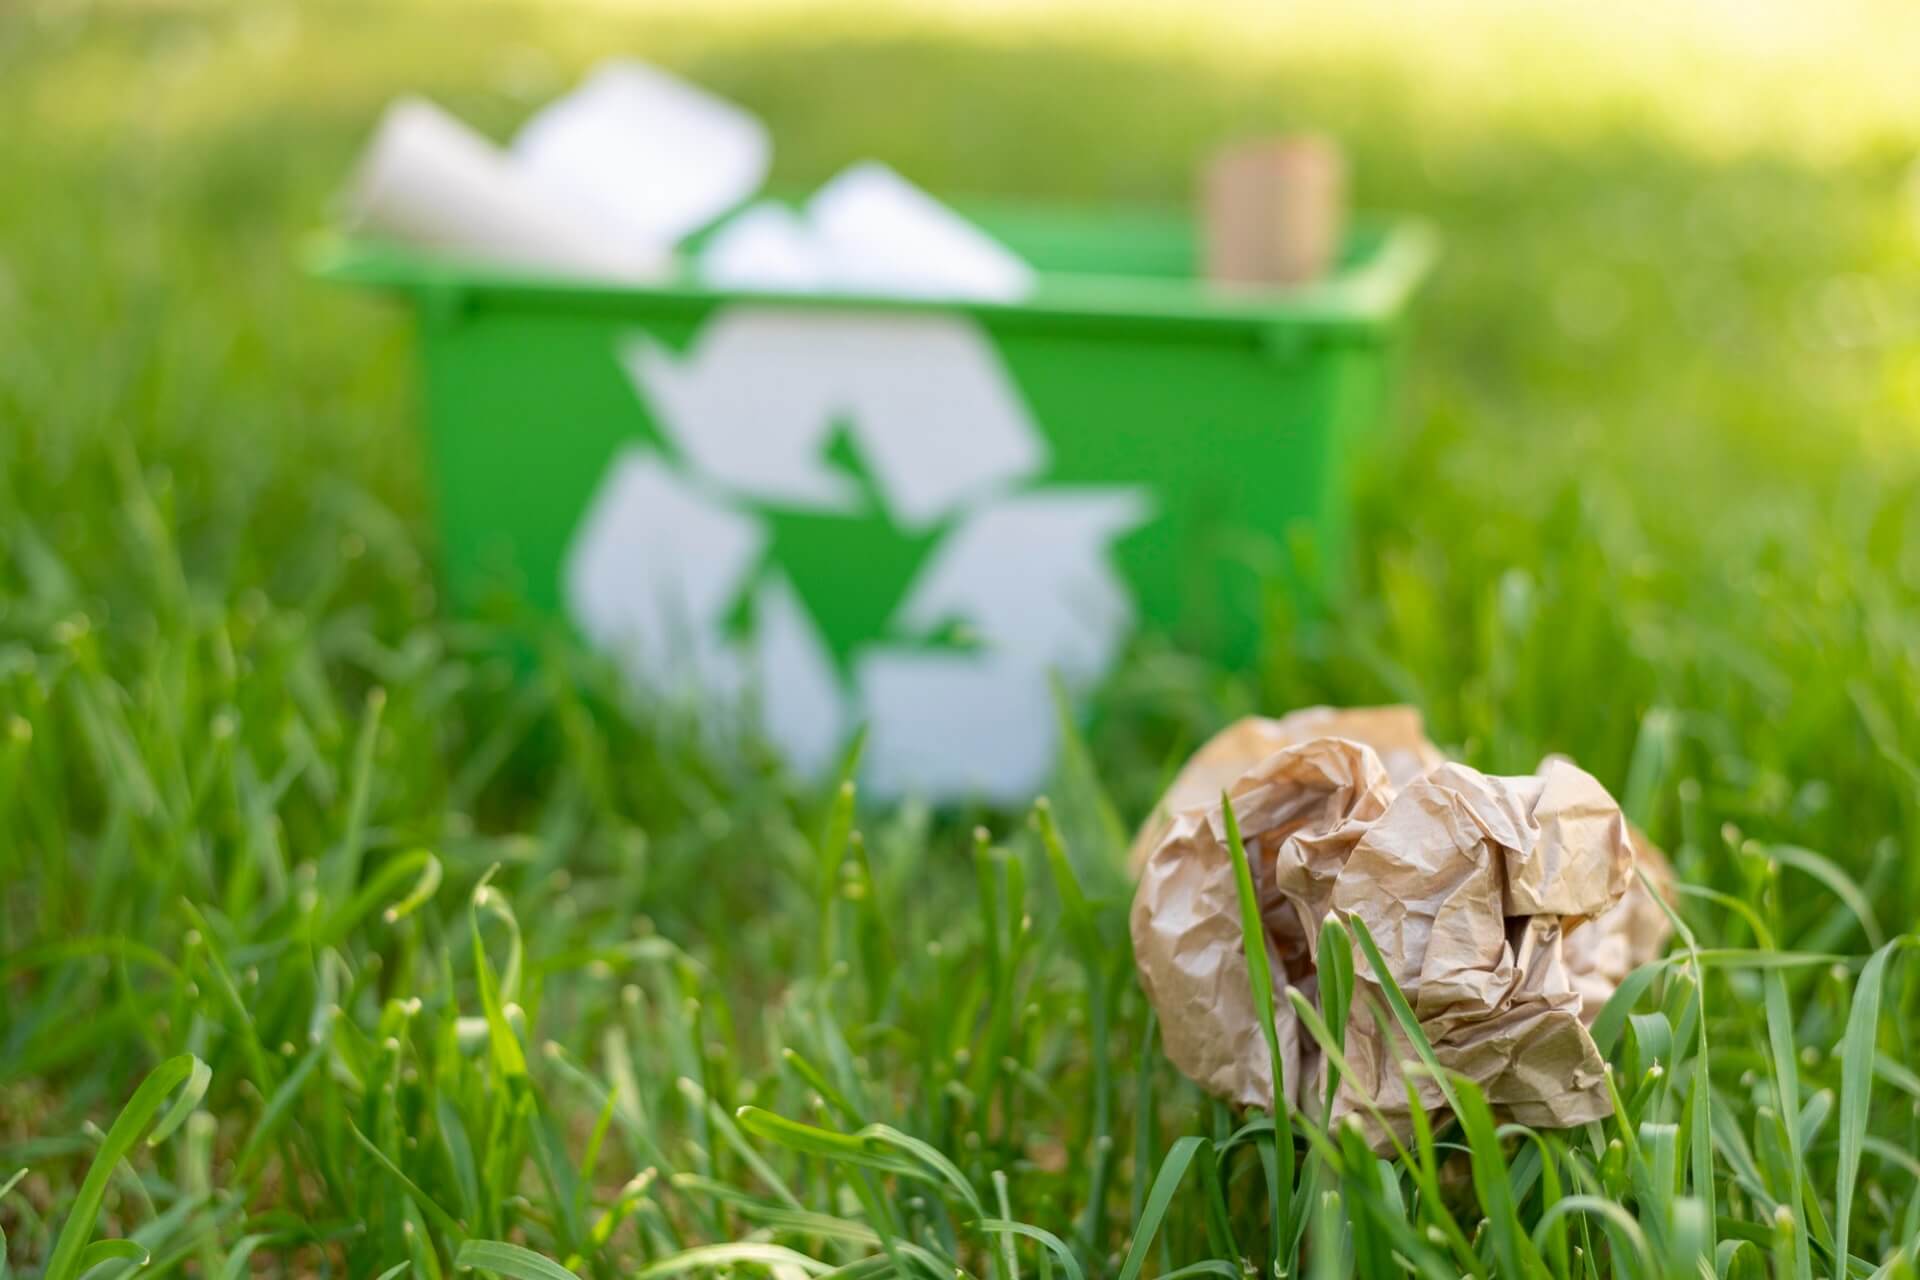 Tips For Minimizing Waste And Going Green